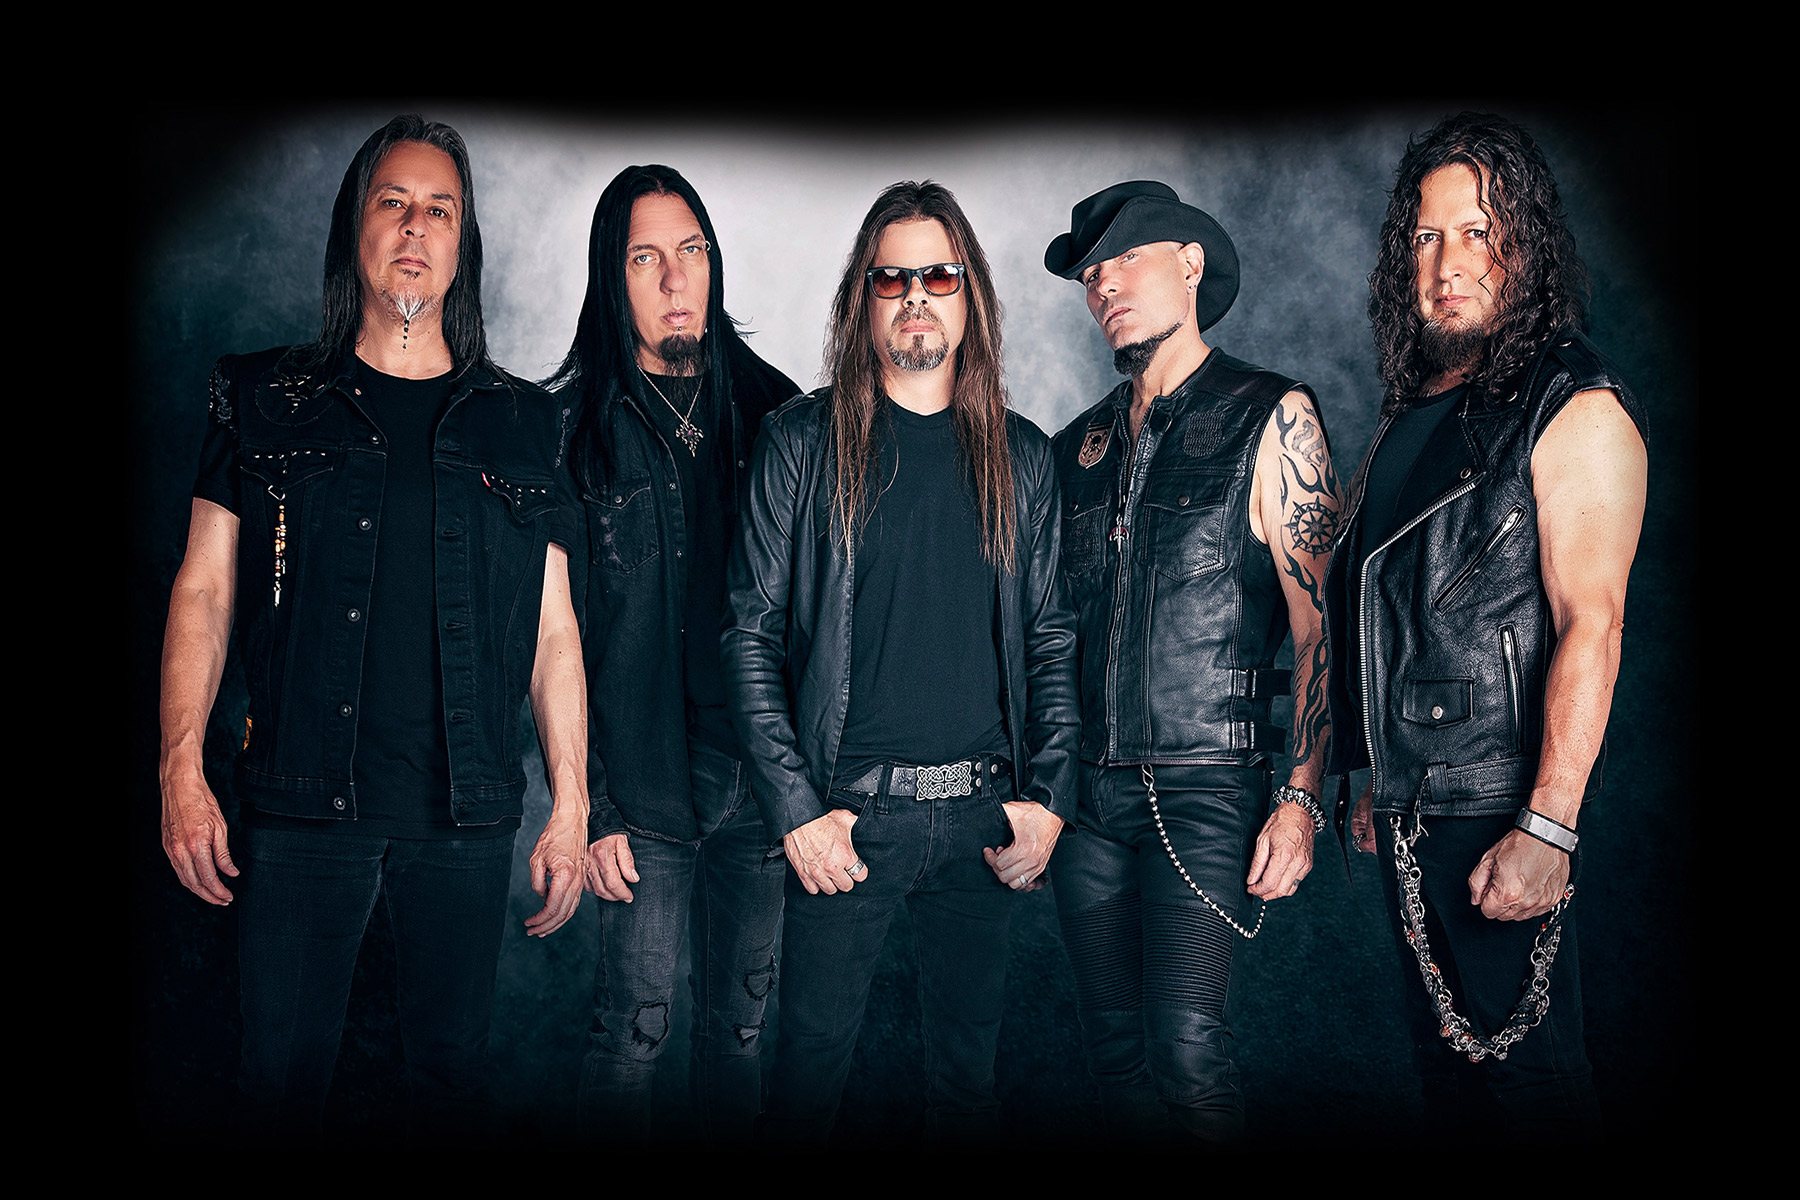 queensryche 2023 tour review